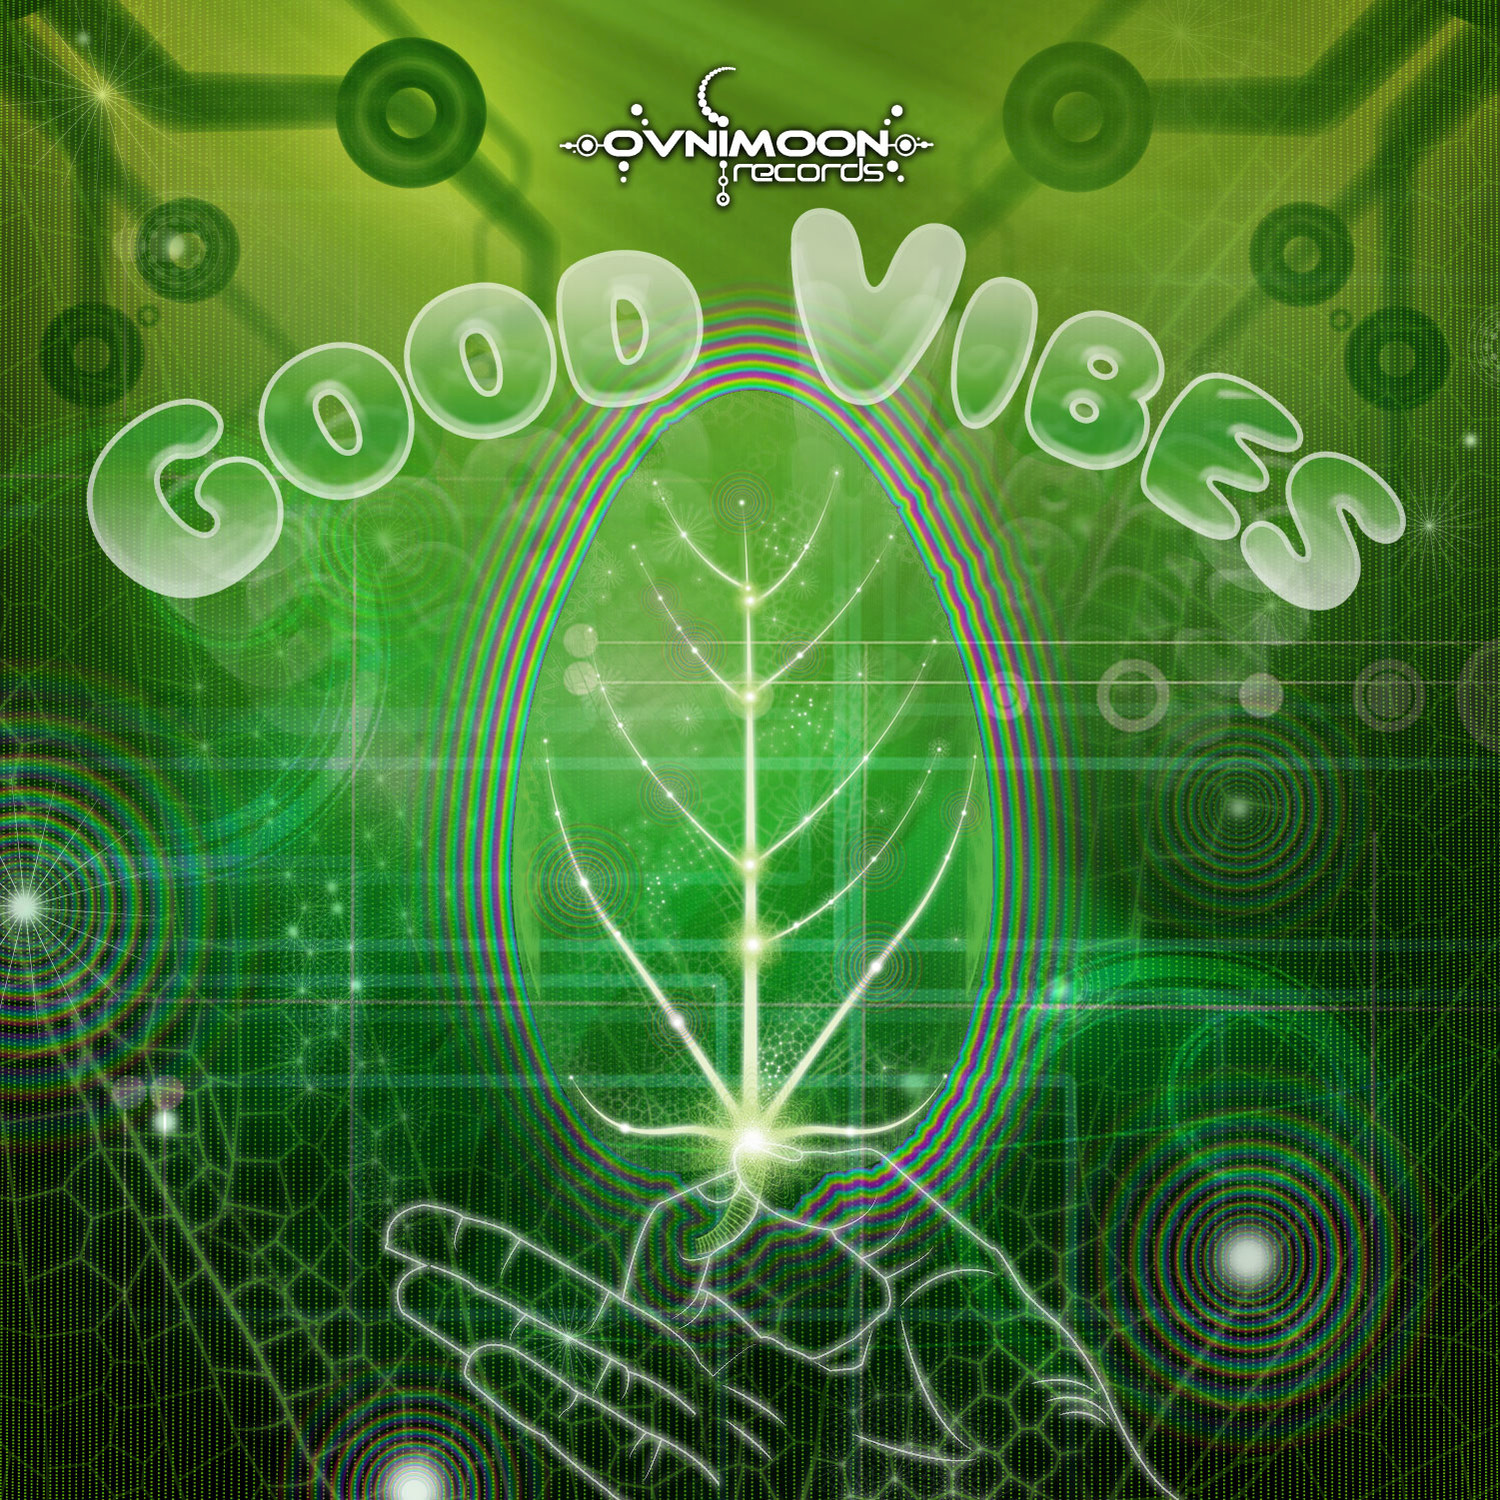 Good Vibes Compiled by Pulsar & Ovnimoon (Best Of Progressive, Goa Trance, Psychedelic Trance)